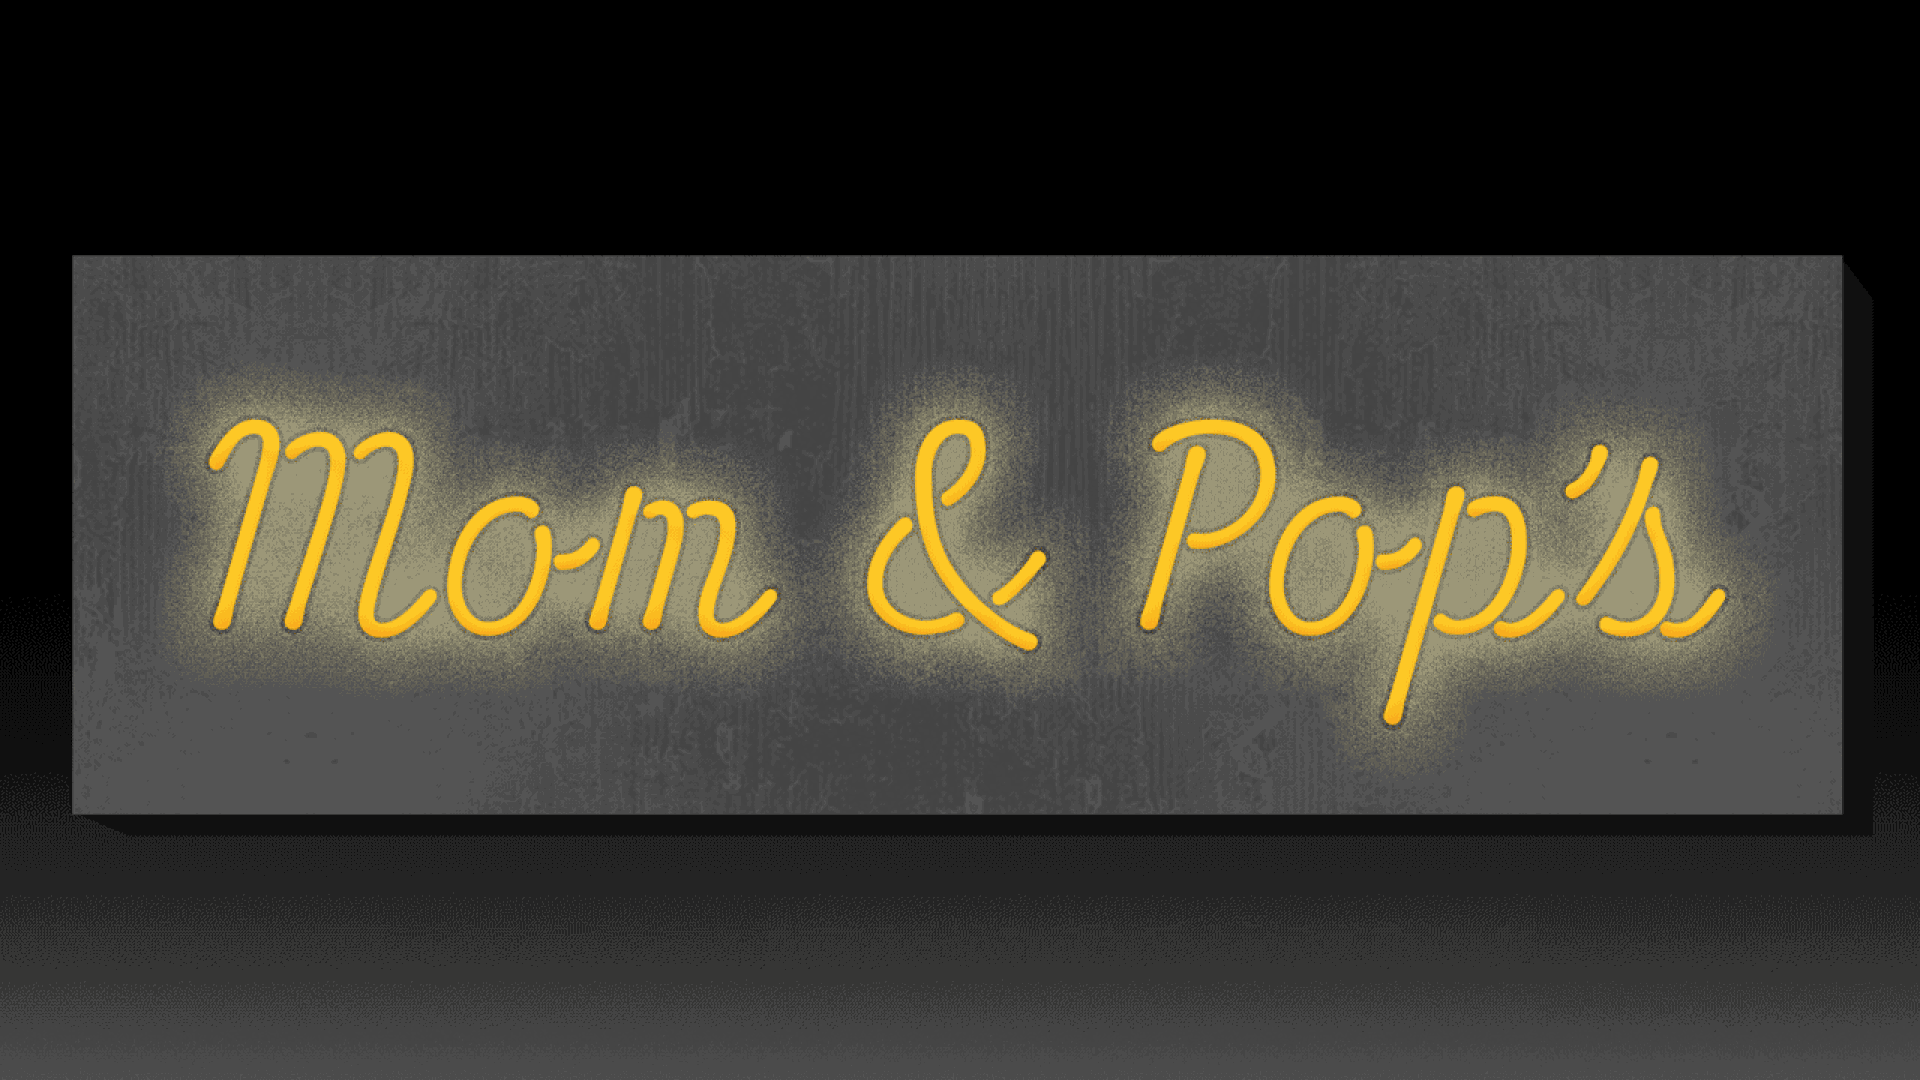 Animated illustration of a Mom & Pop's LED sign flickering and turning off